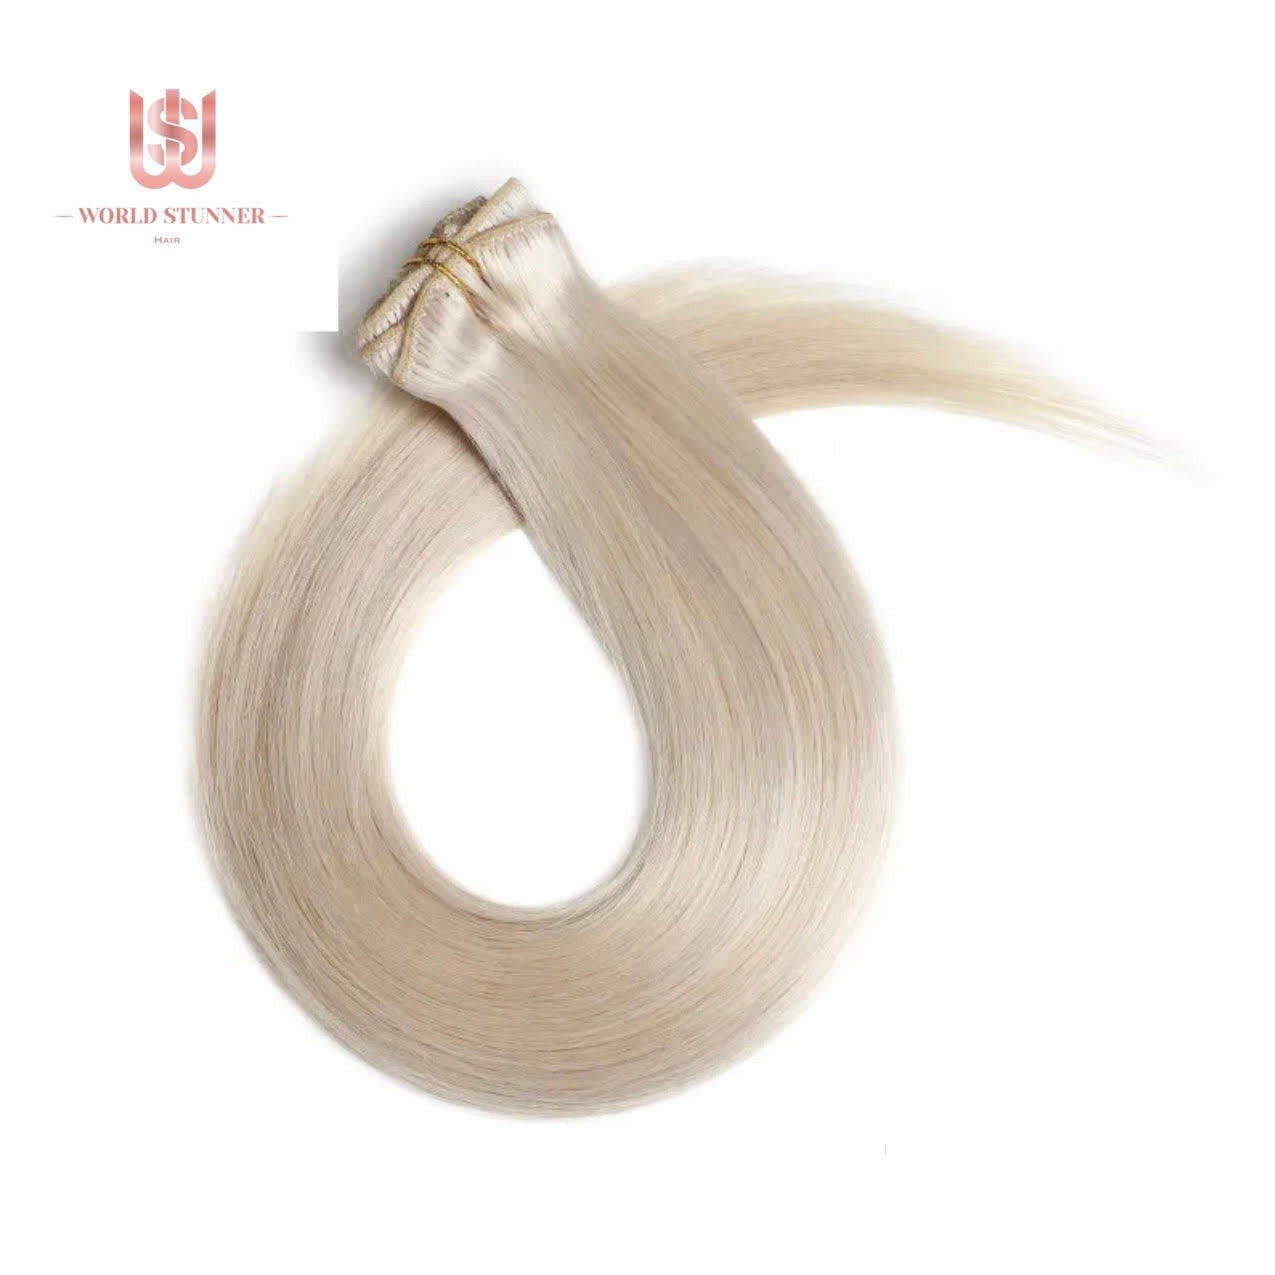 60A BLONDE - SUPER THICK 22” 7 PIECE STRAIGHT CLIPS IN HAIR EXTENSIONS